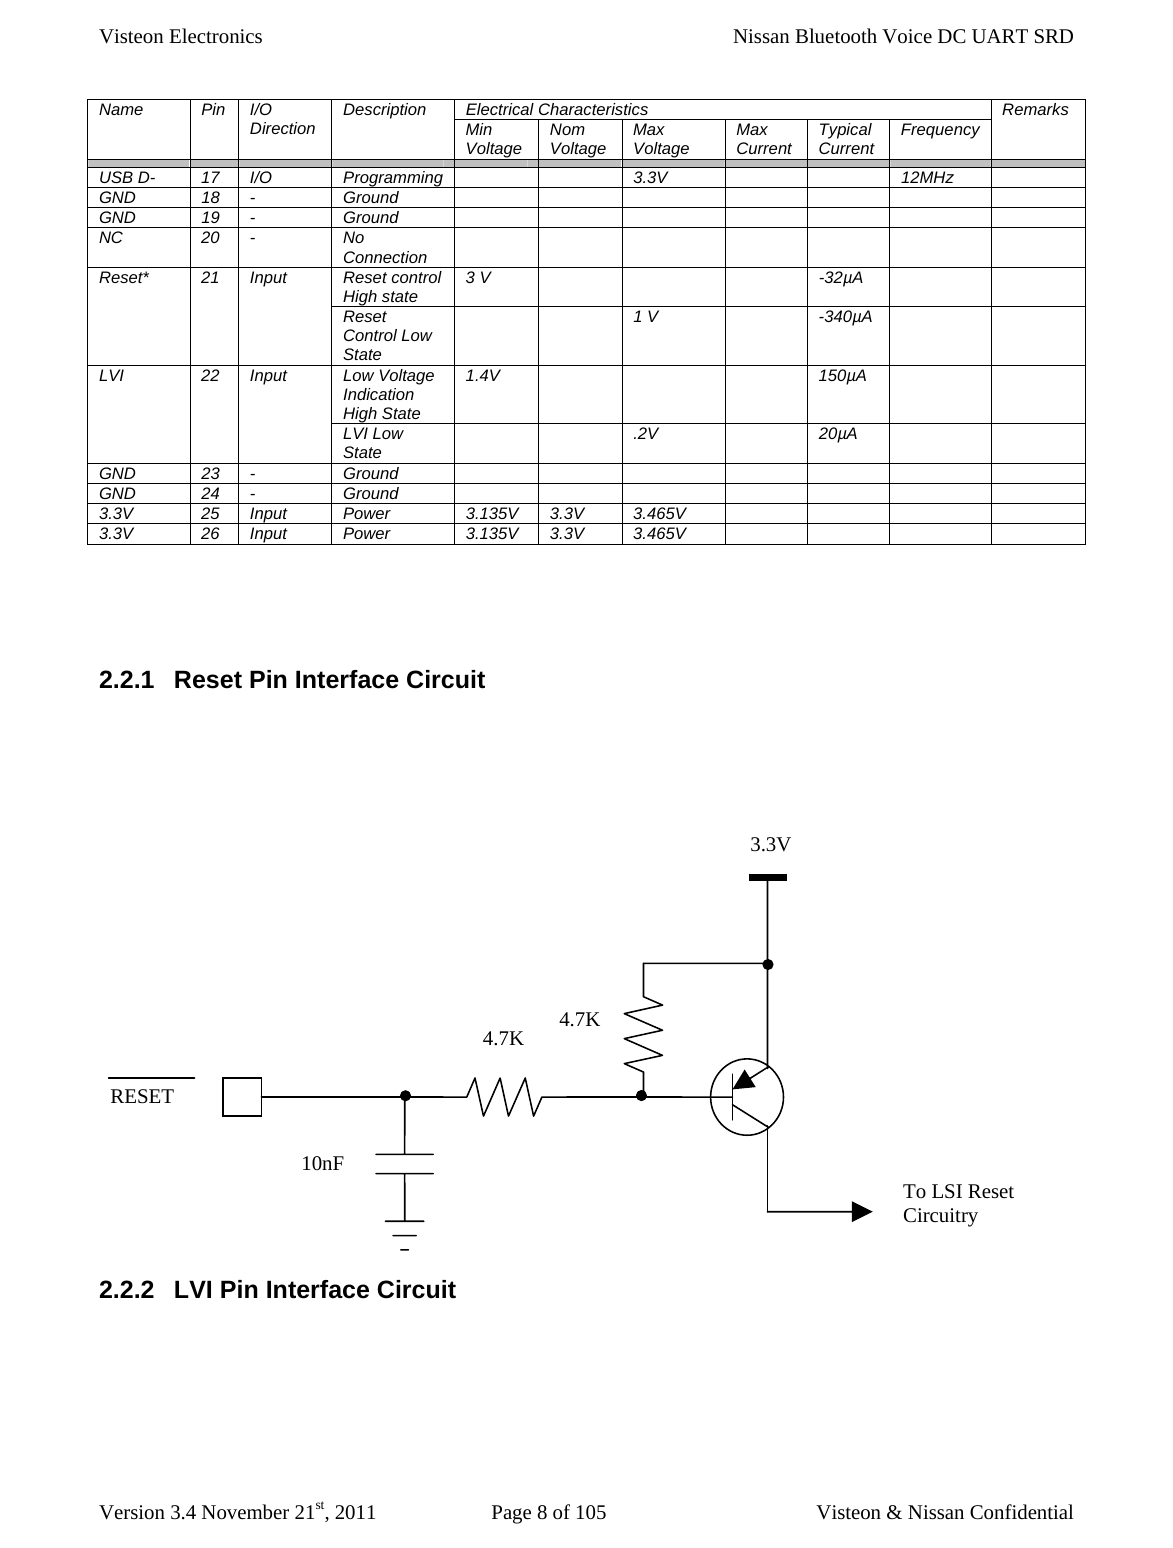 Visteon Electronics    Nissan Bluetooth Voice DC UART SRD  Version 3.4 November 21st, 2011  Page 8 of 105  Visteon &amp; Nissan Confidential Electrical Characteristics Name Pin I/O Direction  Description  Min Voltage  Nom Voltage  Max Voltage  Max Current  Typical Current  Frequency  Remarks                      USB D-  17  I/O  Programming      3.3V      12MHz   GND 18 -  Ground              GND 19 -  Ground              NC 20 -  No Connection           Reset control High state  3 V        -32µA     Reset* 21 Input Reset Control Low State   1 V  -340µA    Low Voltage Indication High State 1.4V       150µA    LVI 22 Input LVI Low State    .2V  20µA    GND 23 -  Ground              GND 24 -  Ground              3.3V 25 Input Power  3.135V 3.3V 3.465V        3.3V 26 Input Power  3.135V 3.3V 3.465V            2.2.1  Reset Pin Interface Circuit       2.2.2  LVI Pin Interface Circuit  3.3V RESET 4.7K 4.7K 10nF To LSI Reset Circuitry 